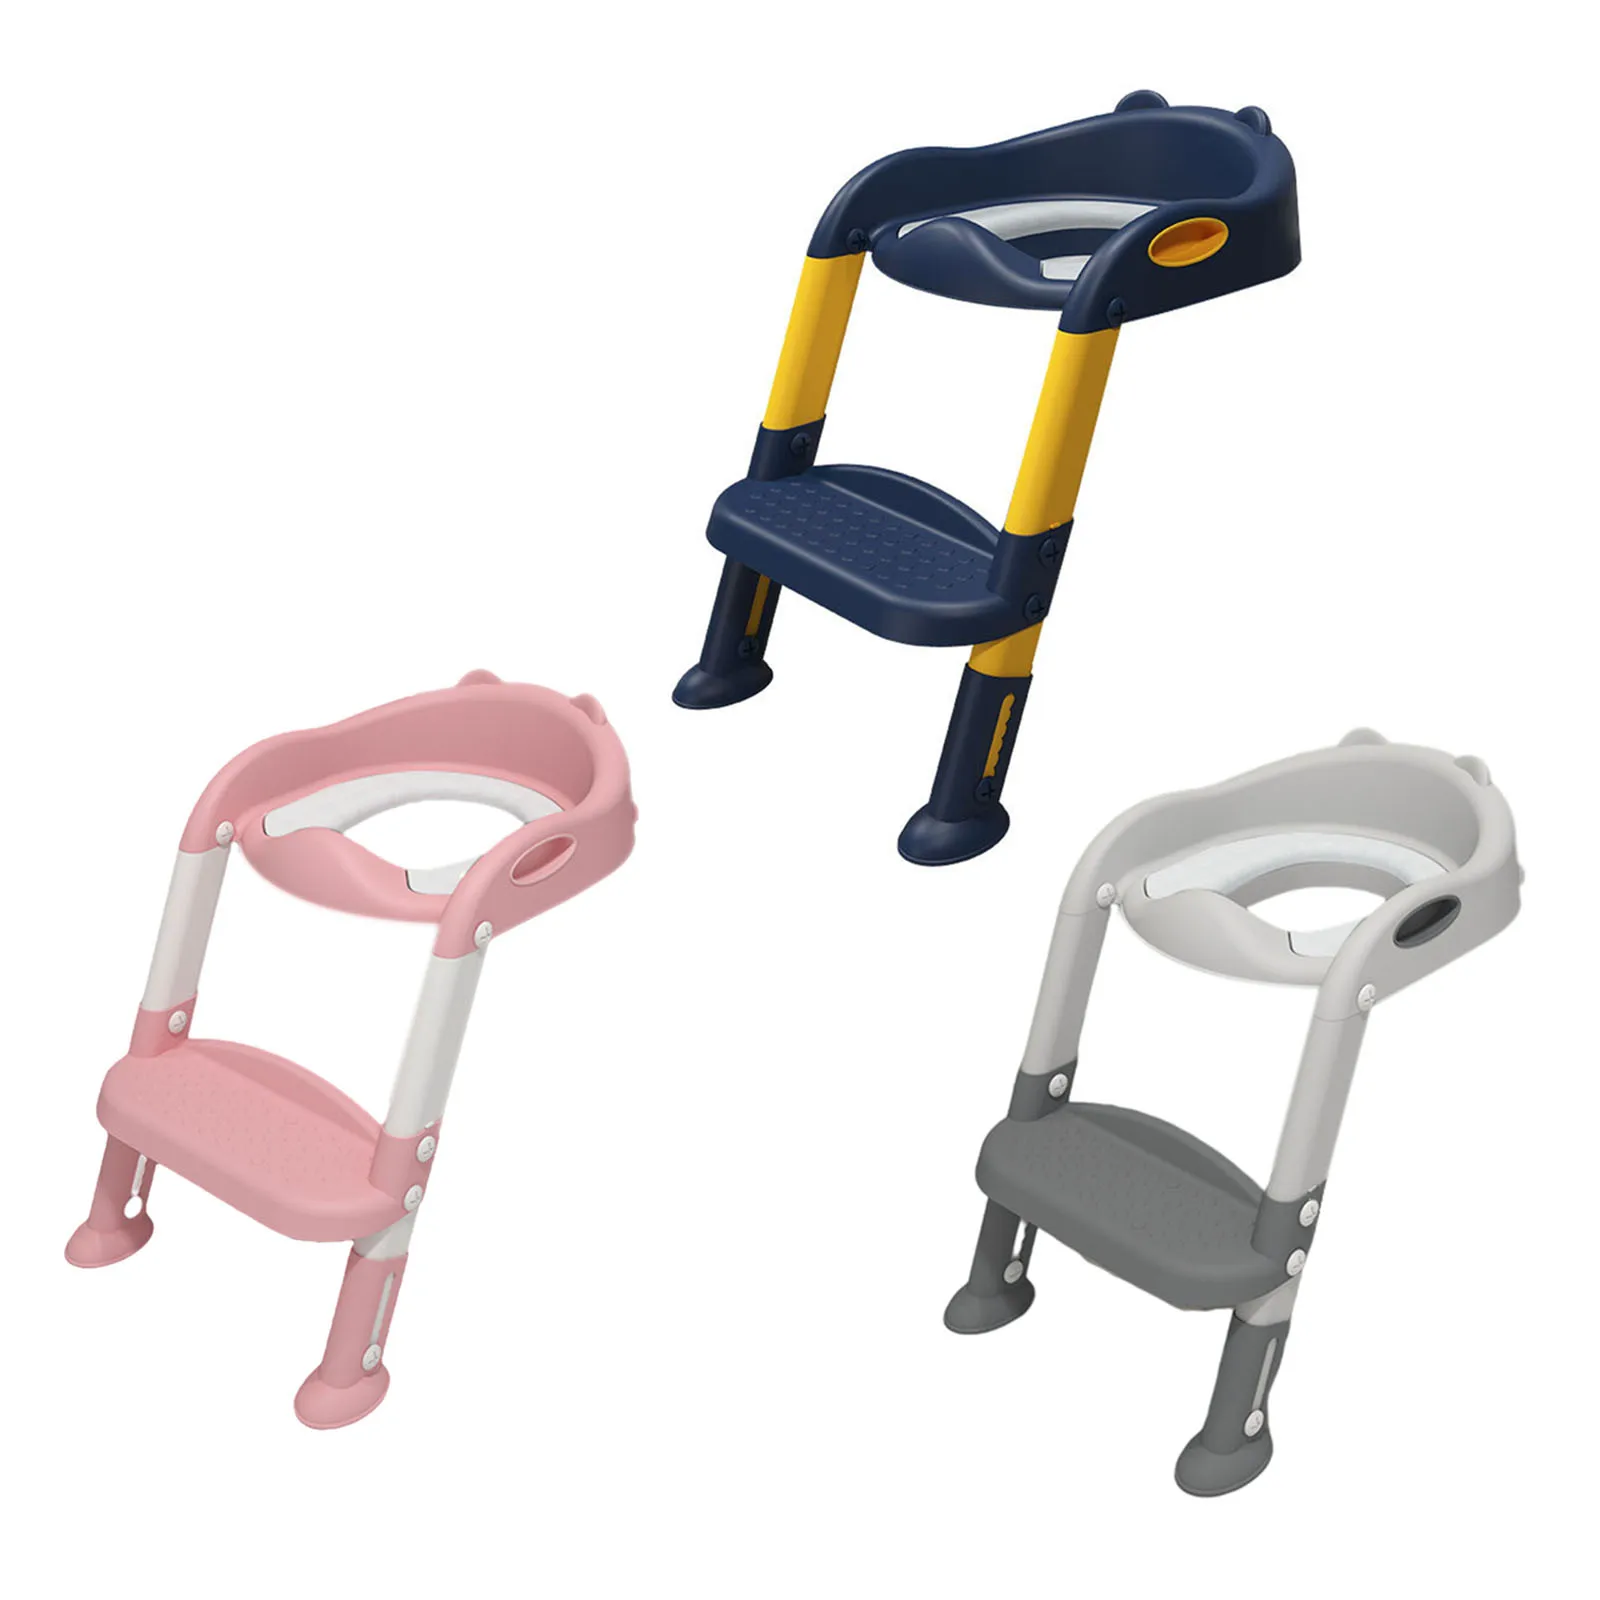 Children Toilet Seat Adjustable Step Stool with Handle Plastic Soft Pad Collapsible Potty Chair for Toddlers Children